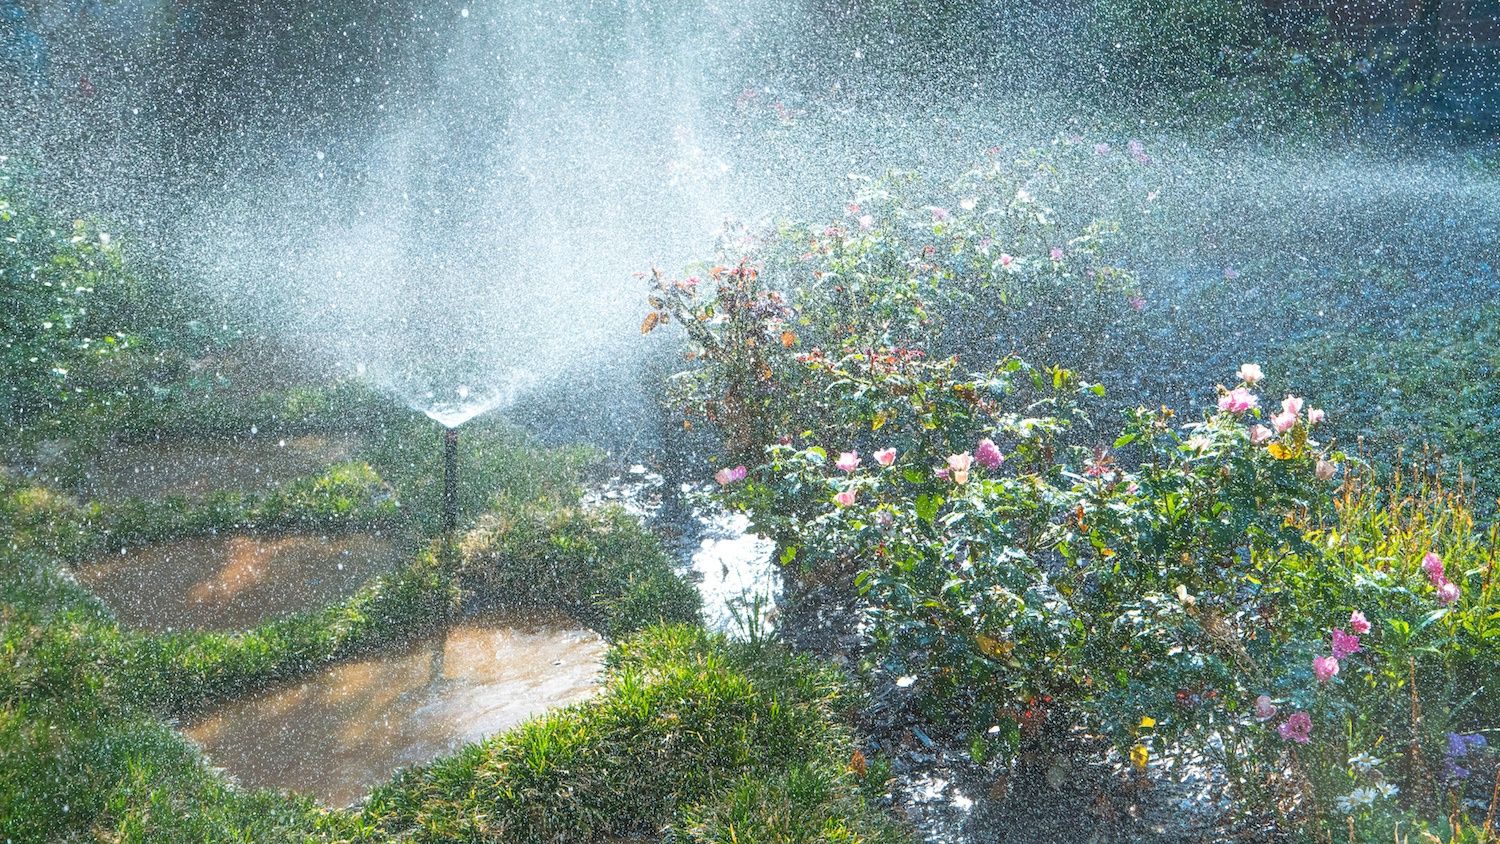 How to Save Water When Watering Your Lawn & Plants: 4 Water Conservation Tips